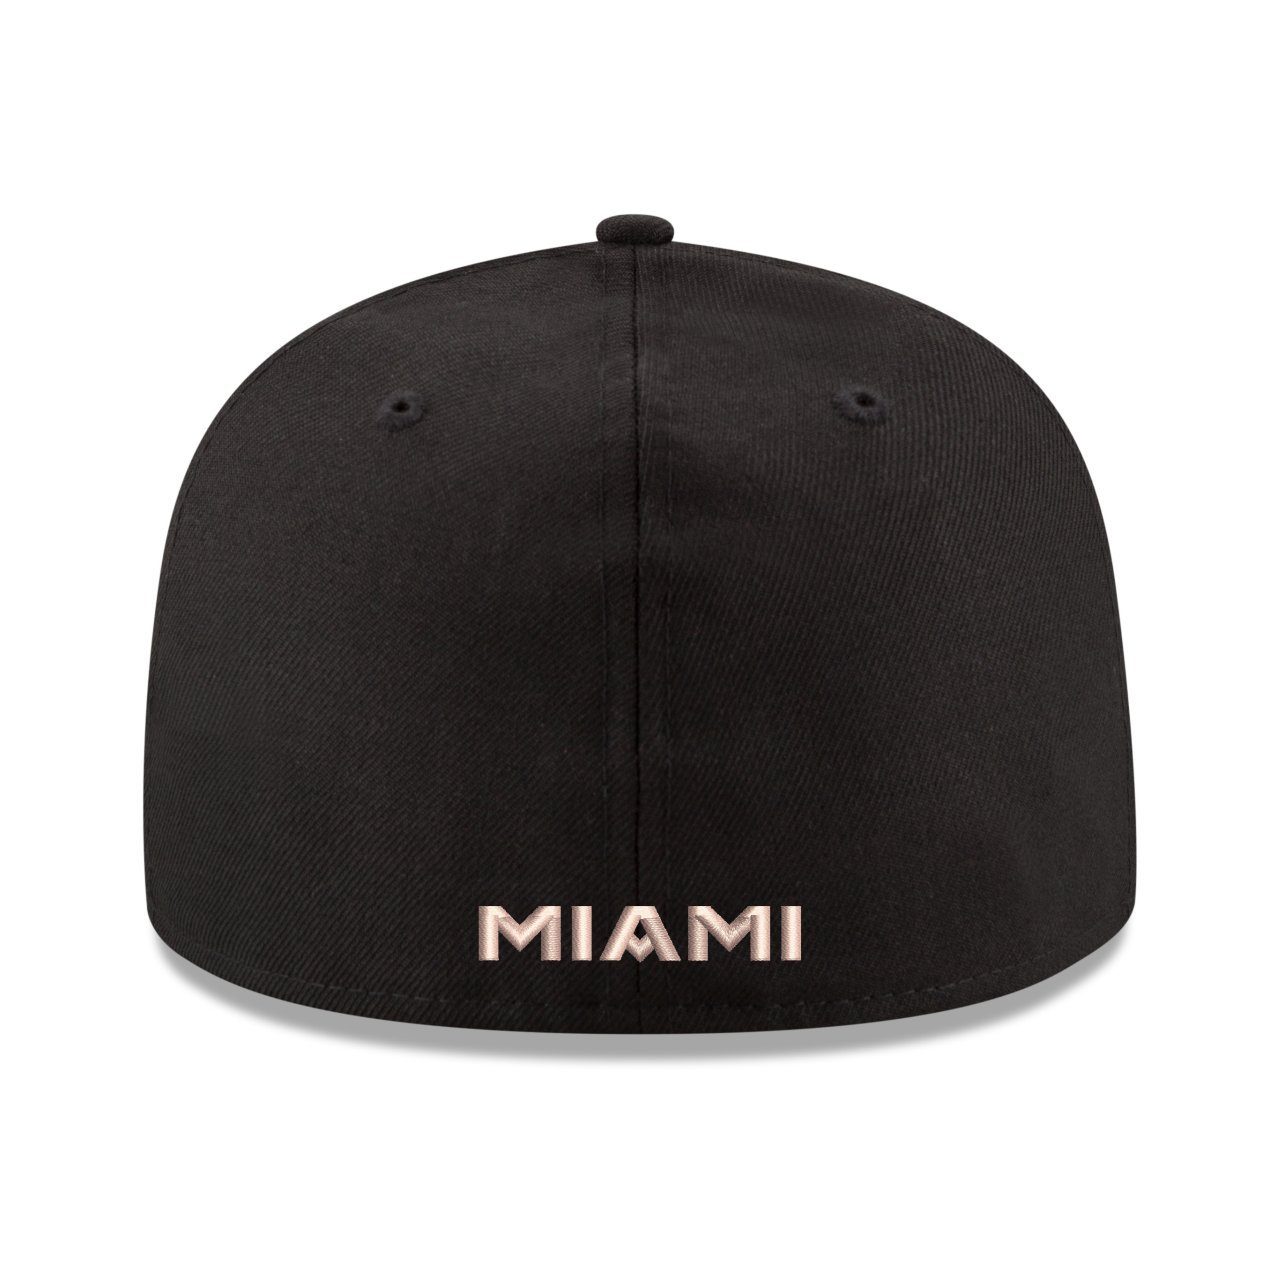 New 59Fifty Era Miami Cap MLS Inter Fitted